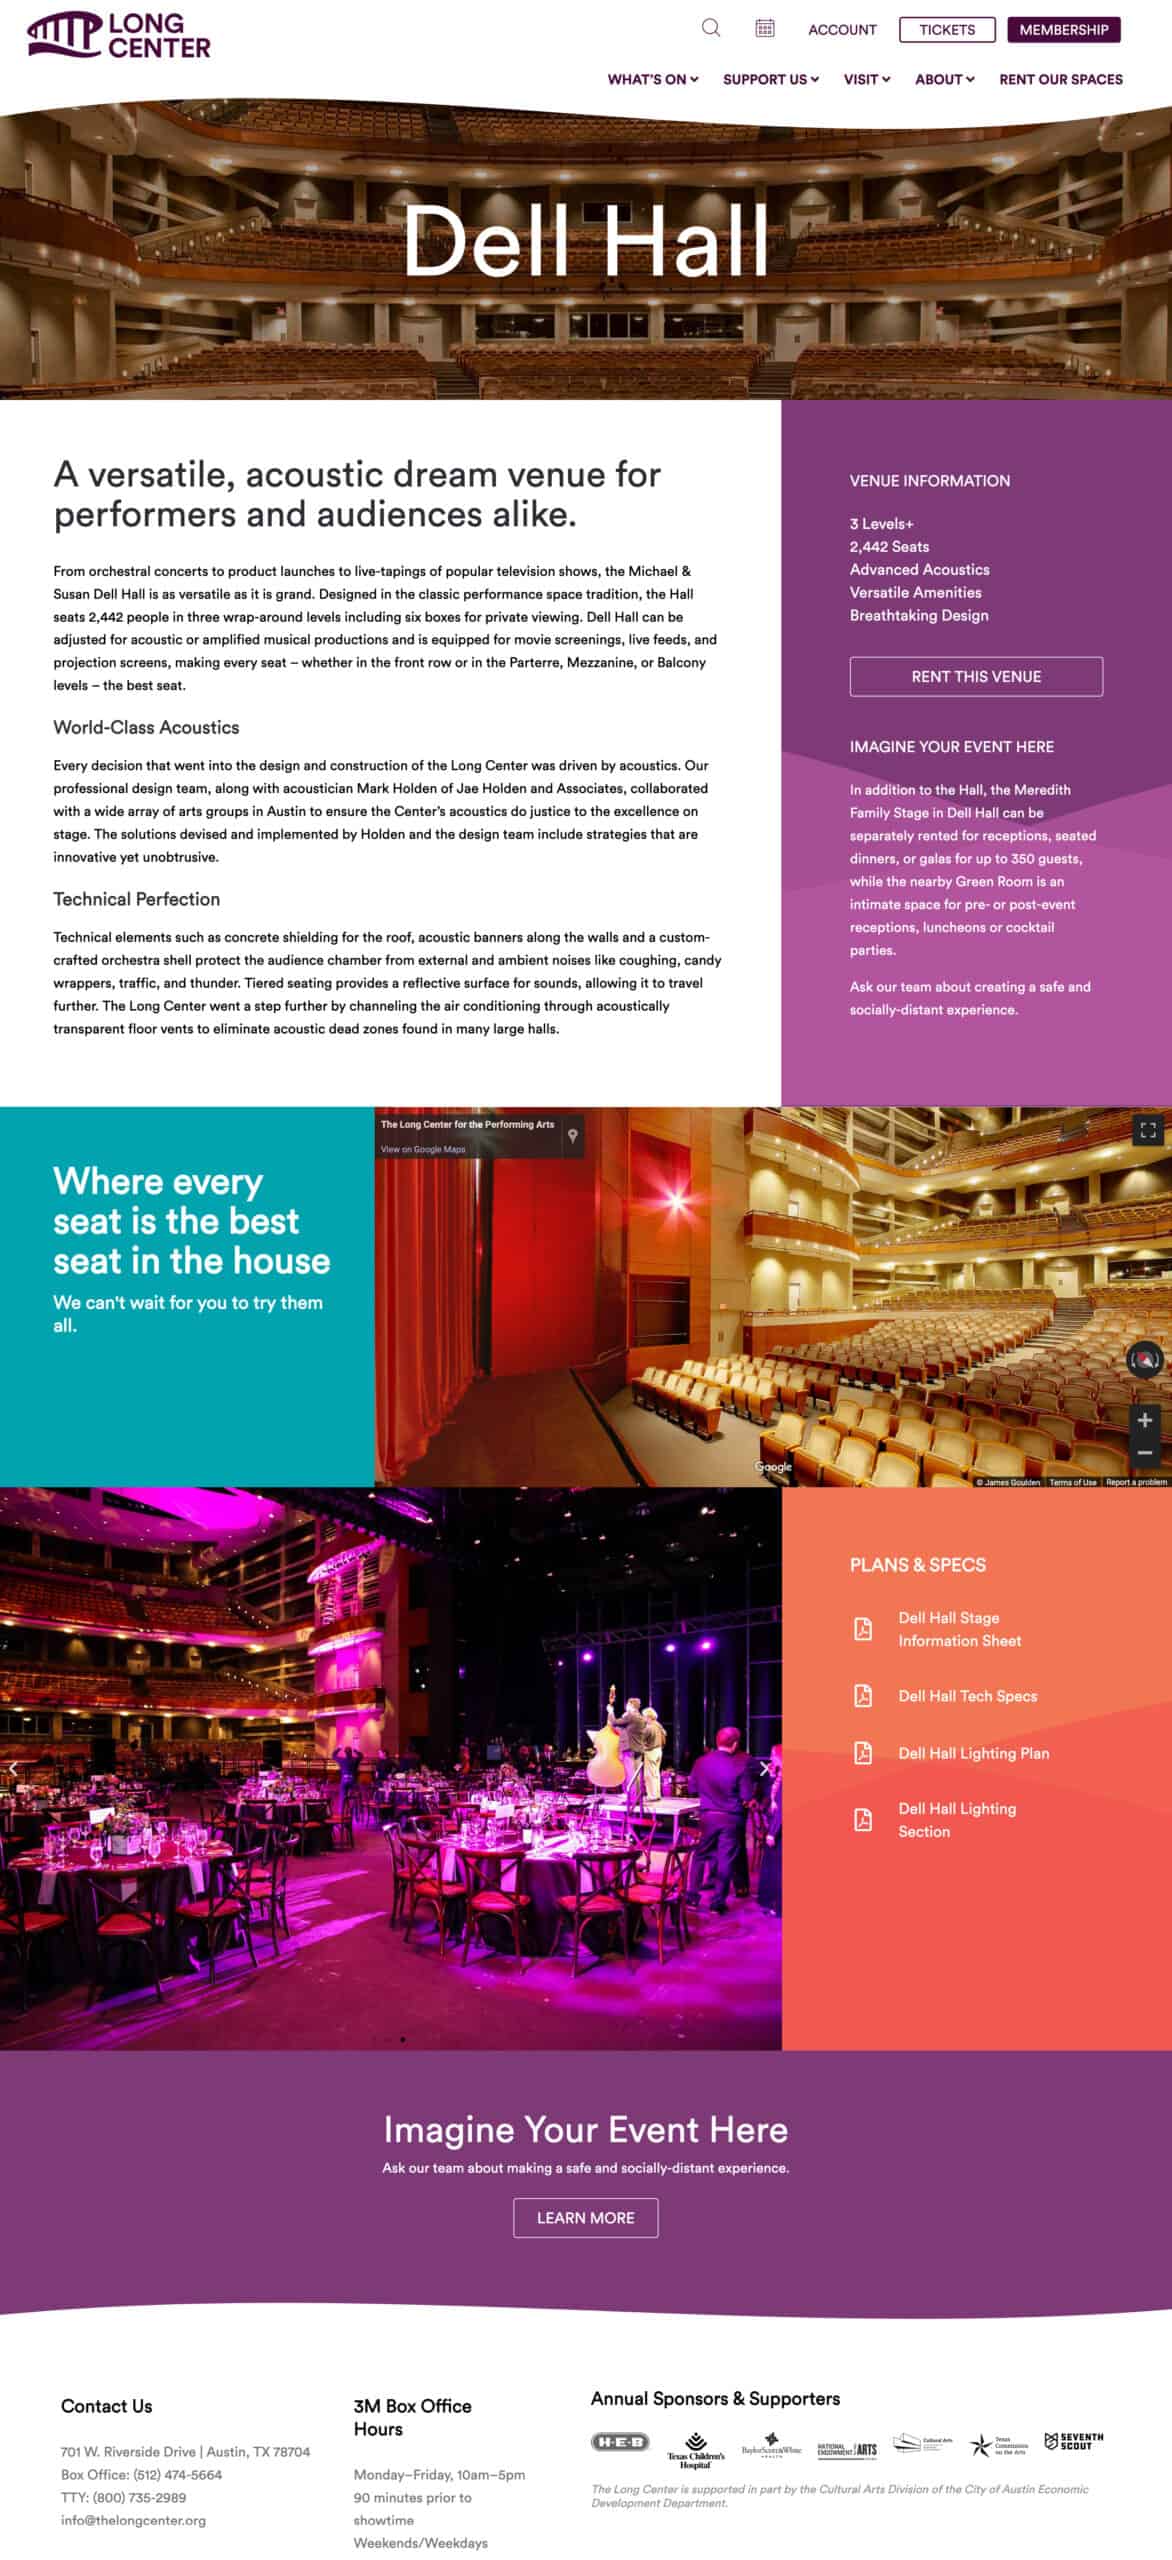 long center website page